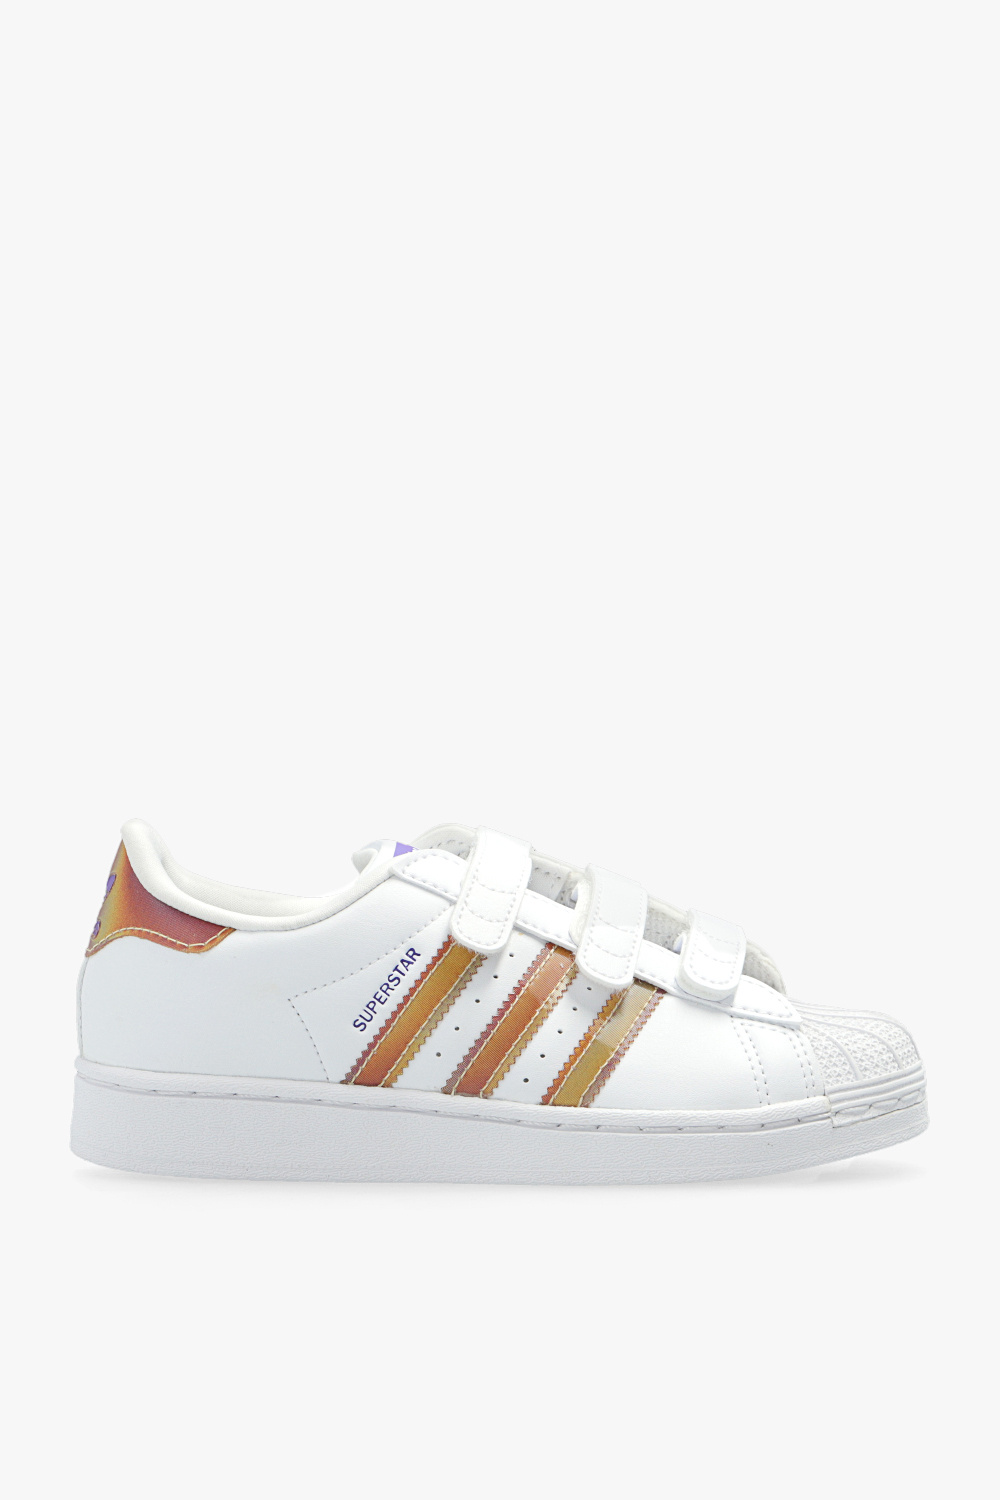 adidas b74706 shoes size chart for women - De-iceShops Canada - 'Super Star CF' sneakers Kids